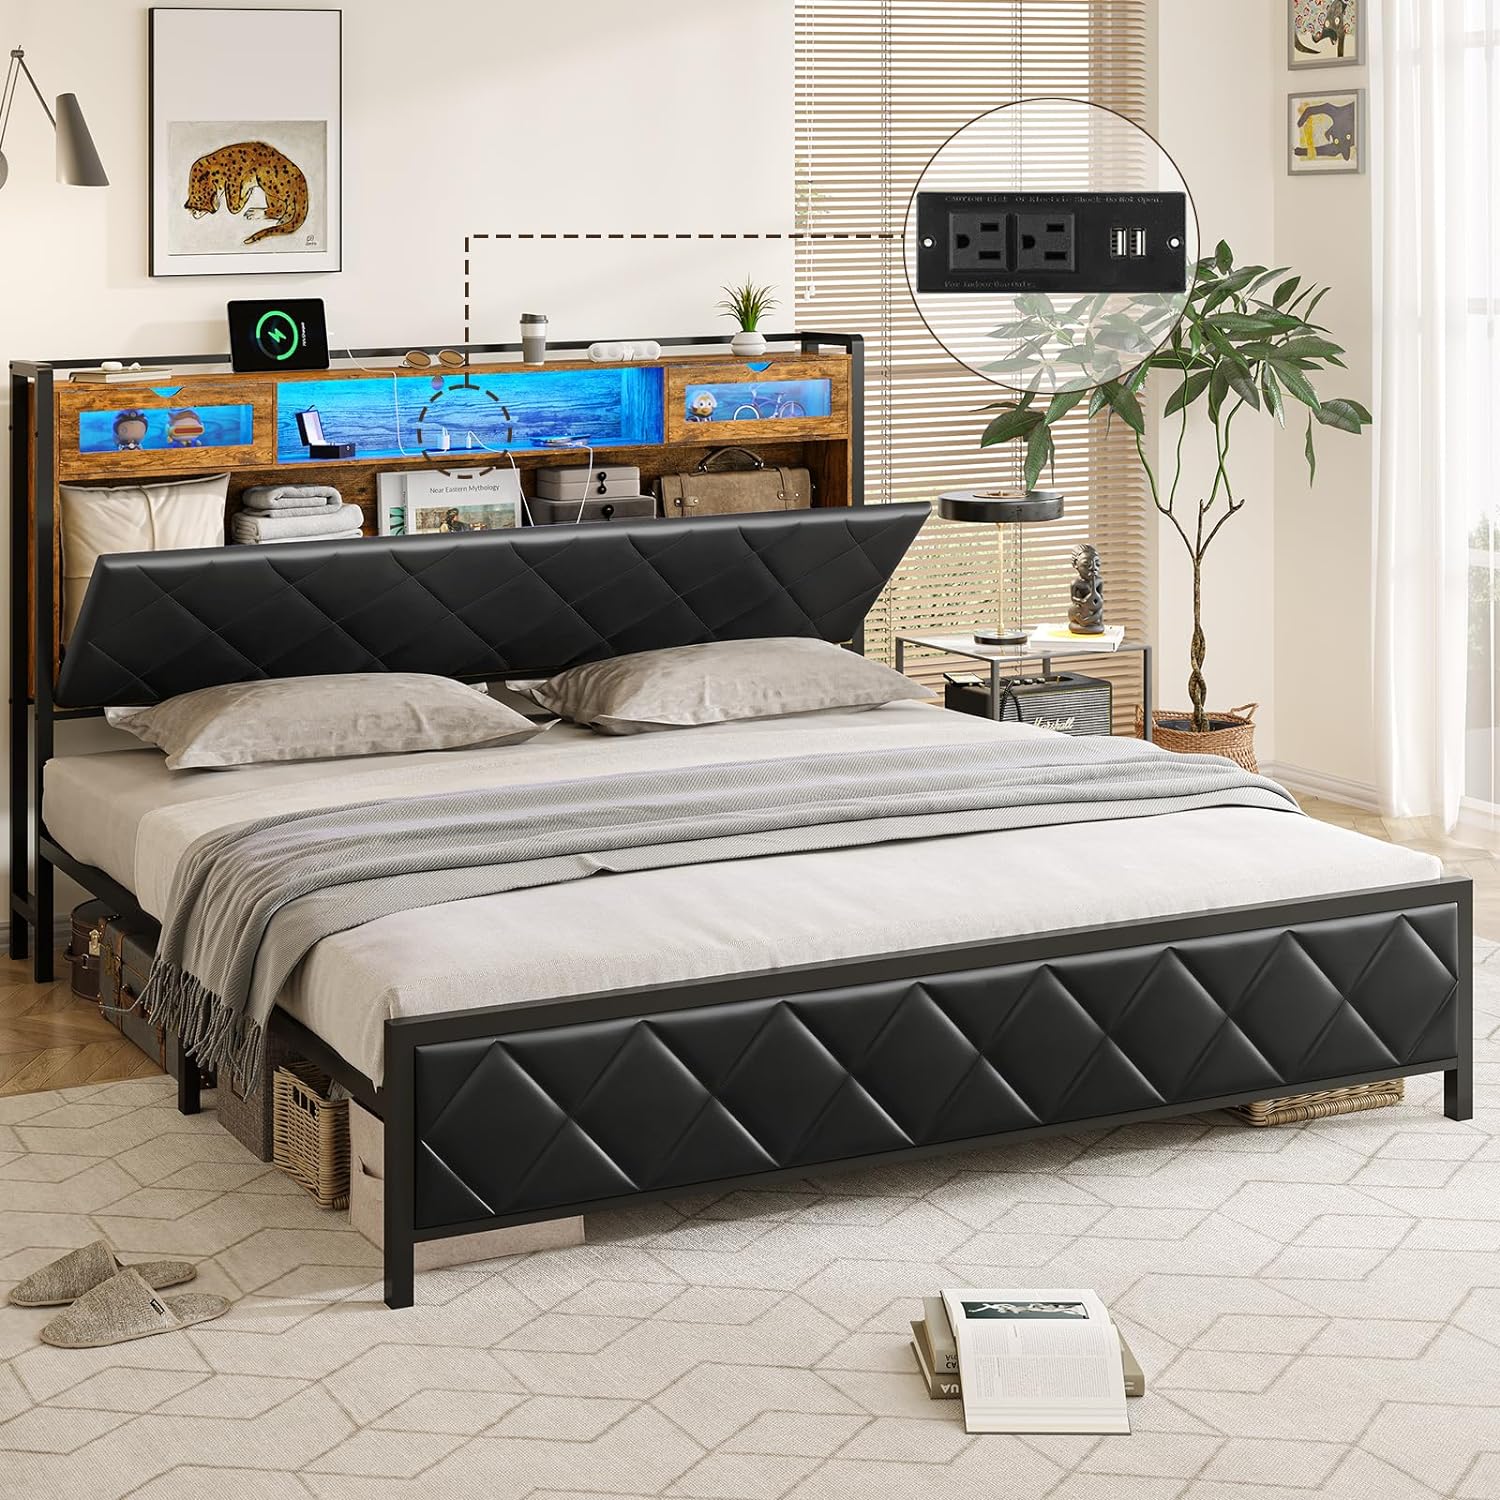 DICTAC LED King Bed Frame with Hidden Storage Headboard and Charging Station King Size Platform Bed with Led Lights and Upholstered Storage Headboard,Heavy Duty Metal Slats,No Box Spring Needed,Black